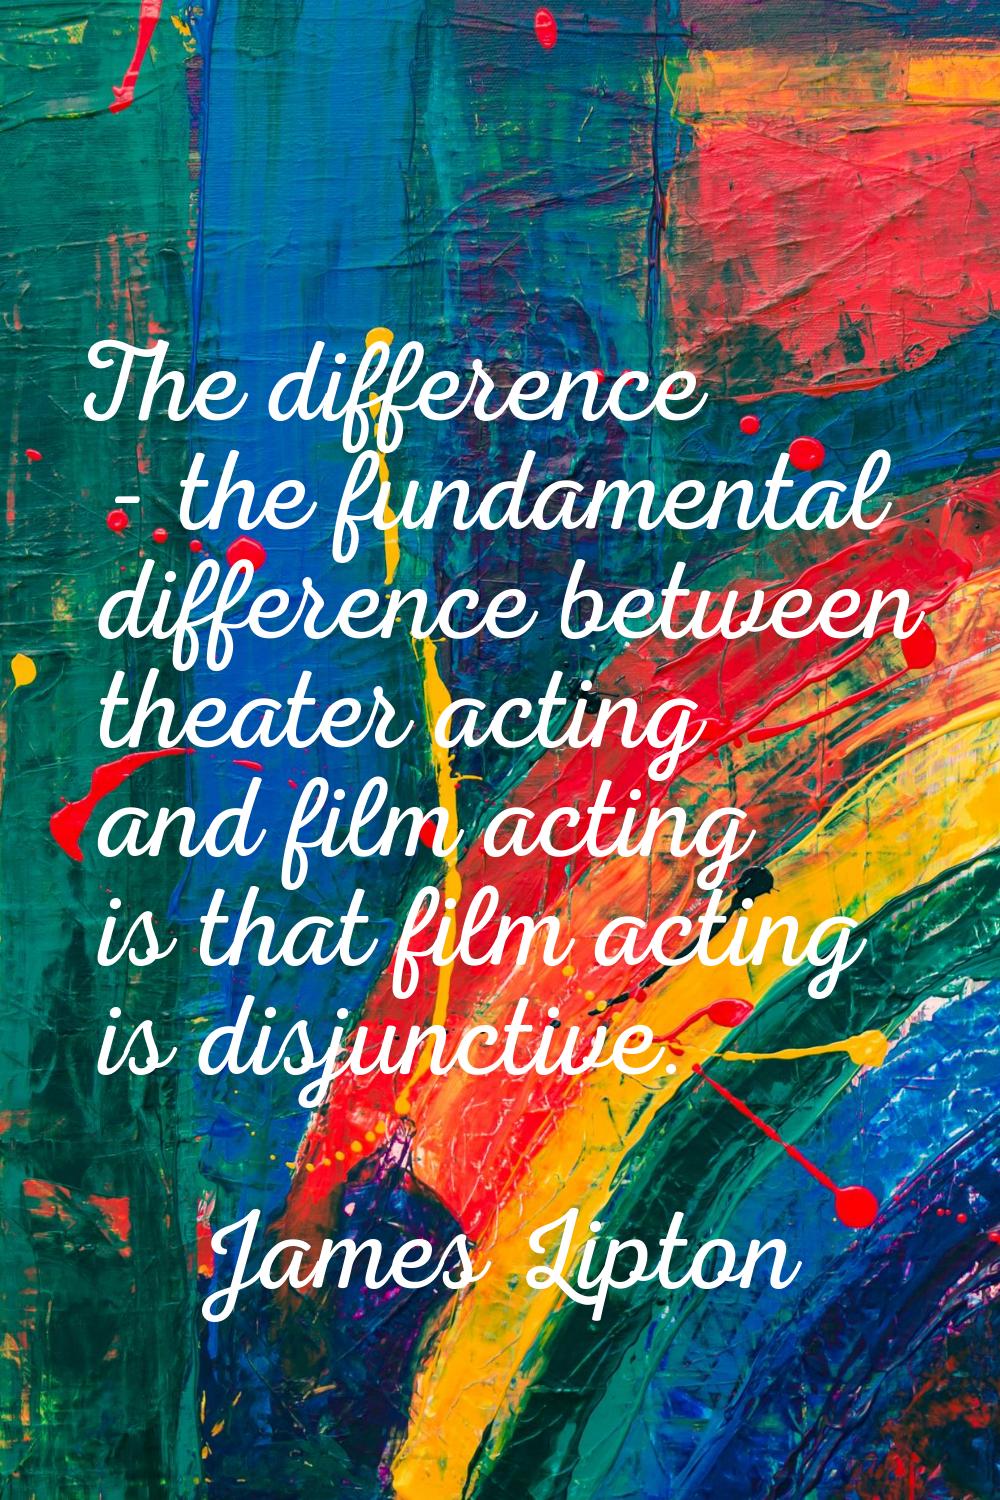 The difference - the fundamental difference between theater acting and film acting is that film act